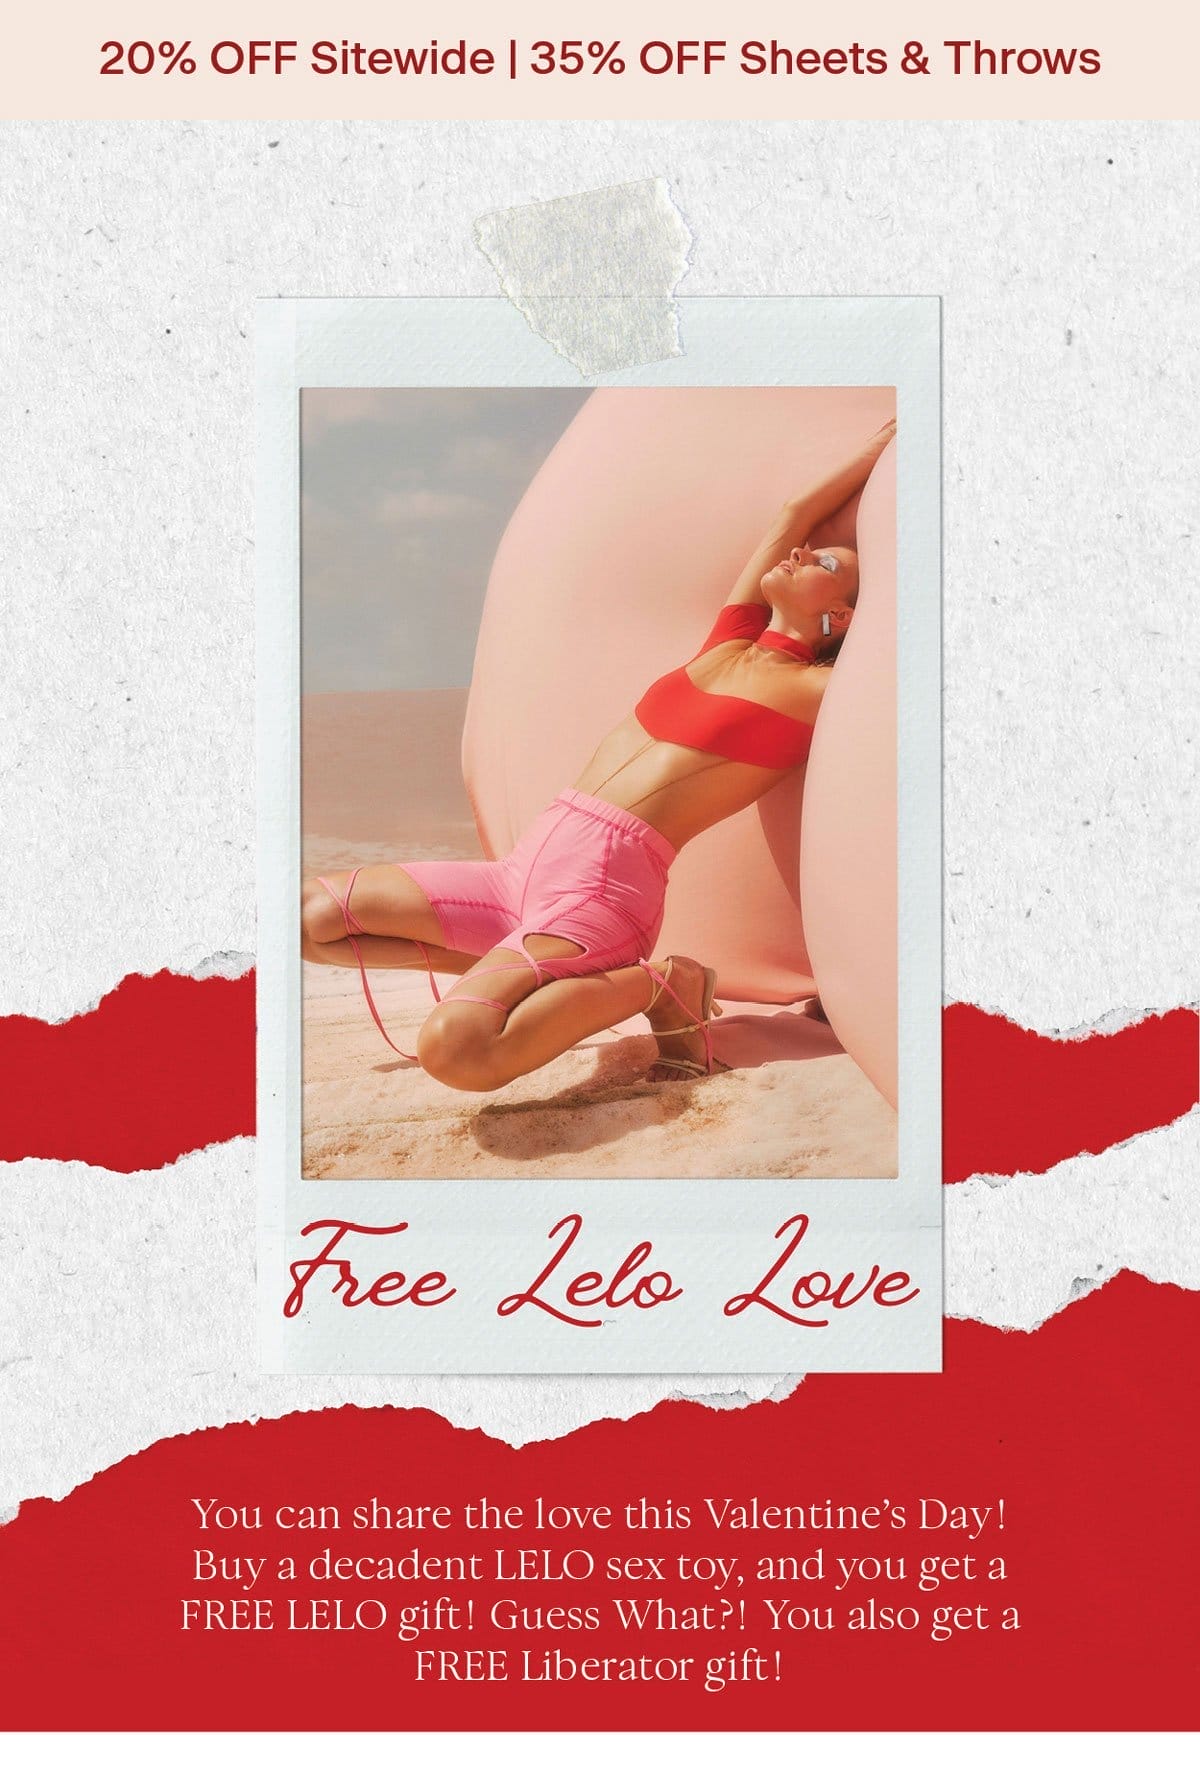 20% off sitewide | 35% off sheets and throws FREE LELO L❤️VE You can share the love this Valentine’s Day! Buy a decadent LELO sex toy, and you get a FREE LELO gift! Guess What?! You also get a FREE Liberator gift!